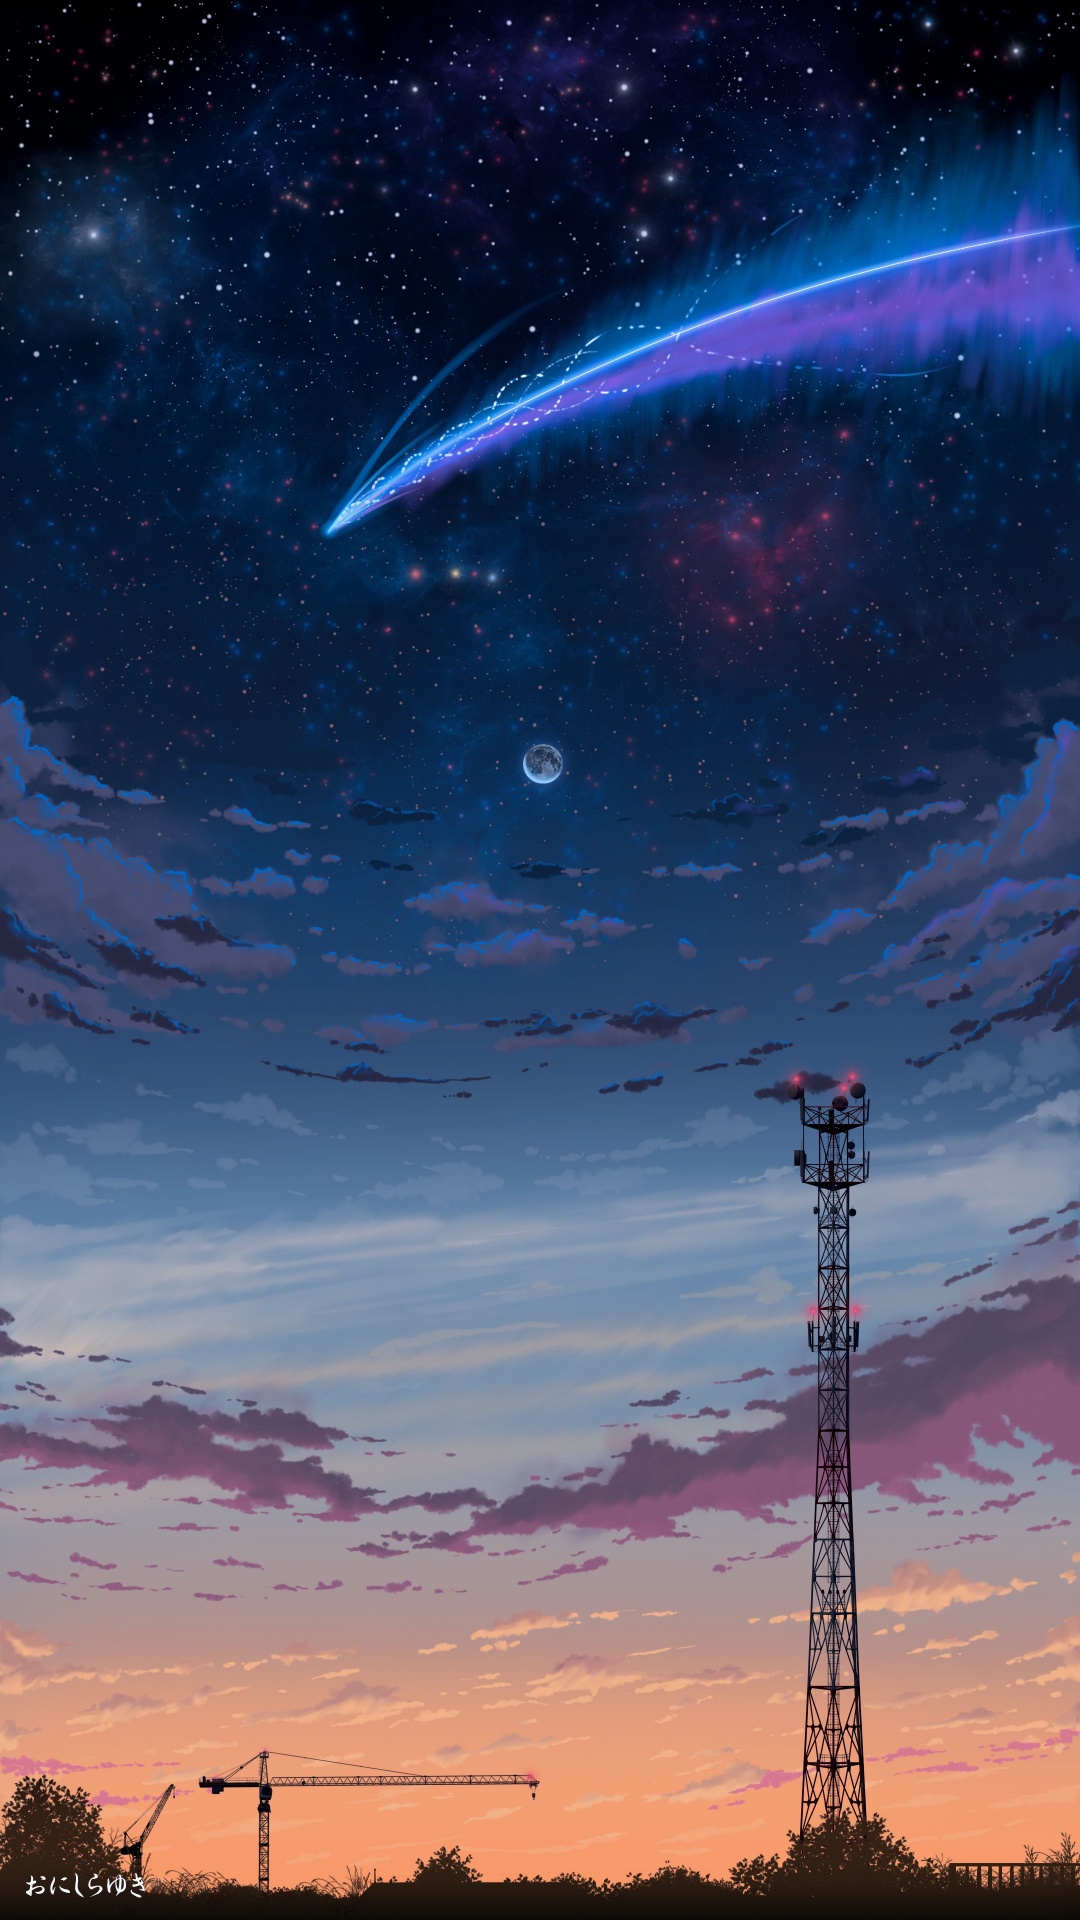 Silhouette of Tower Under Blue Sky With White Clouds During Night Time. Wallpaper in 1080x1920 Resolution